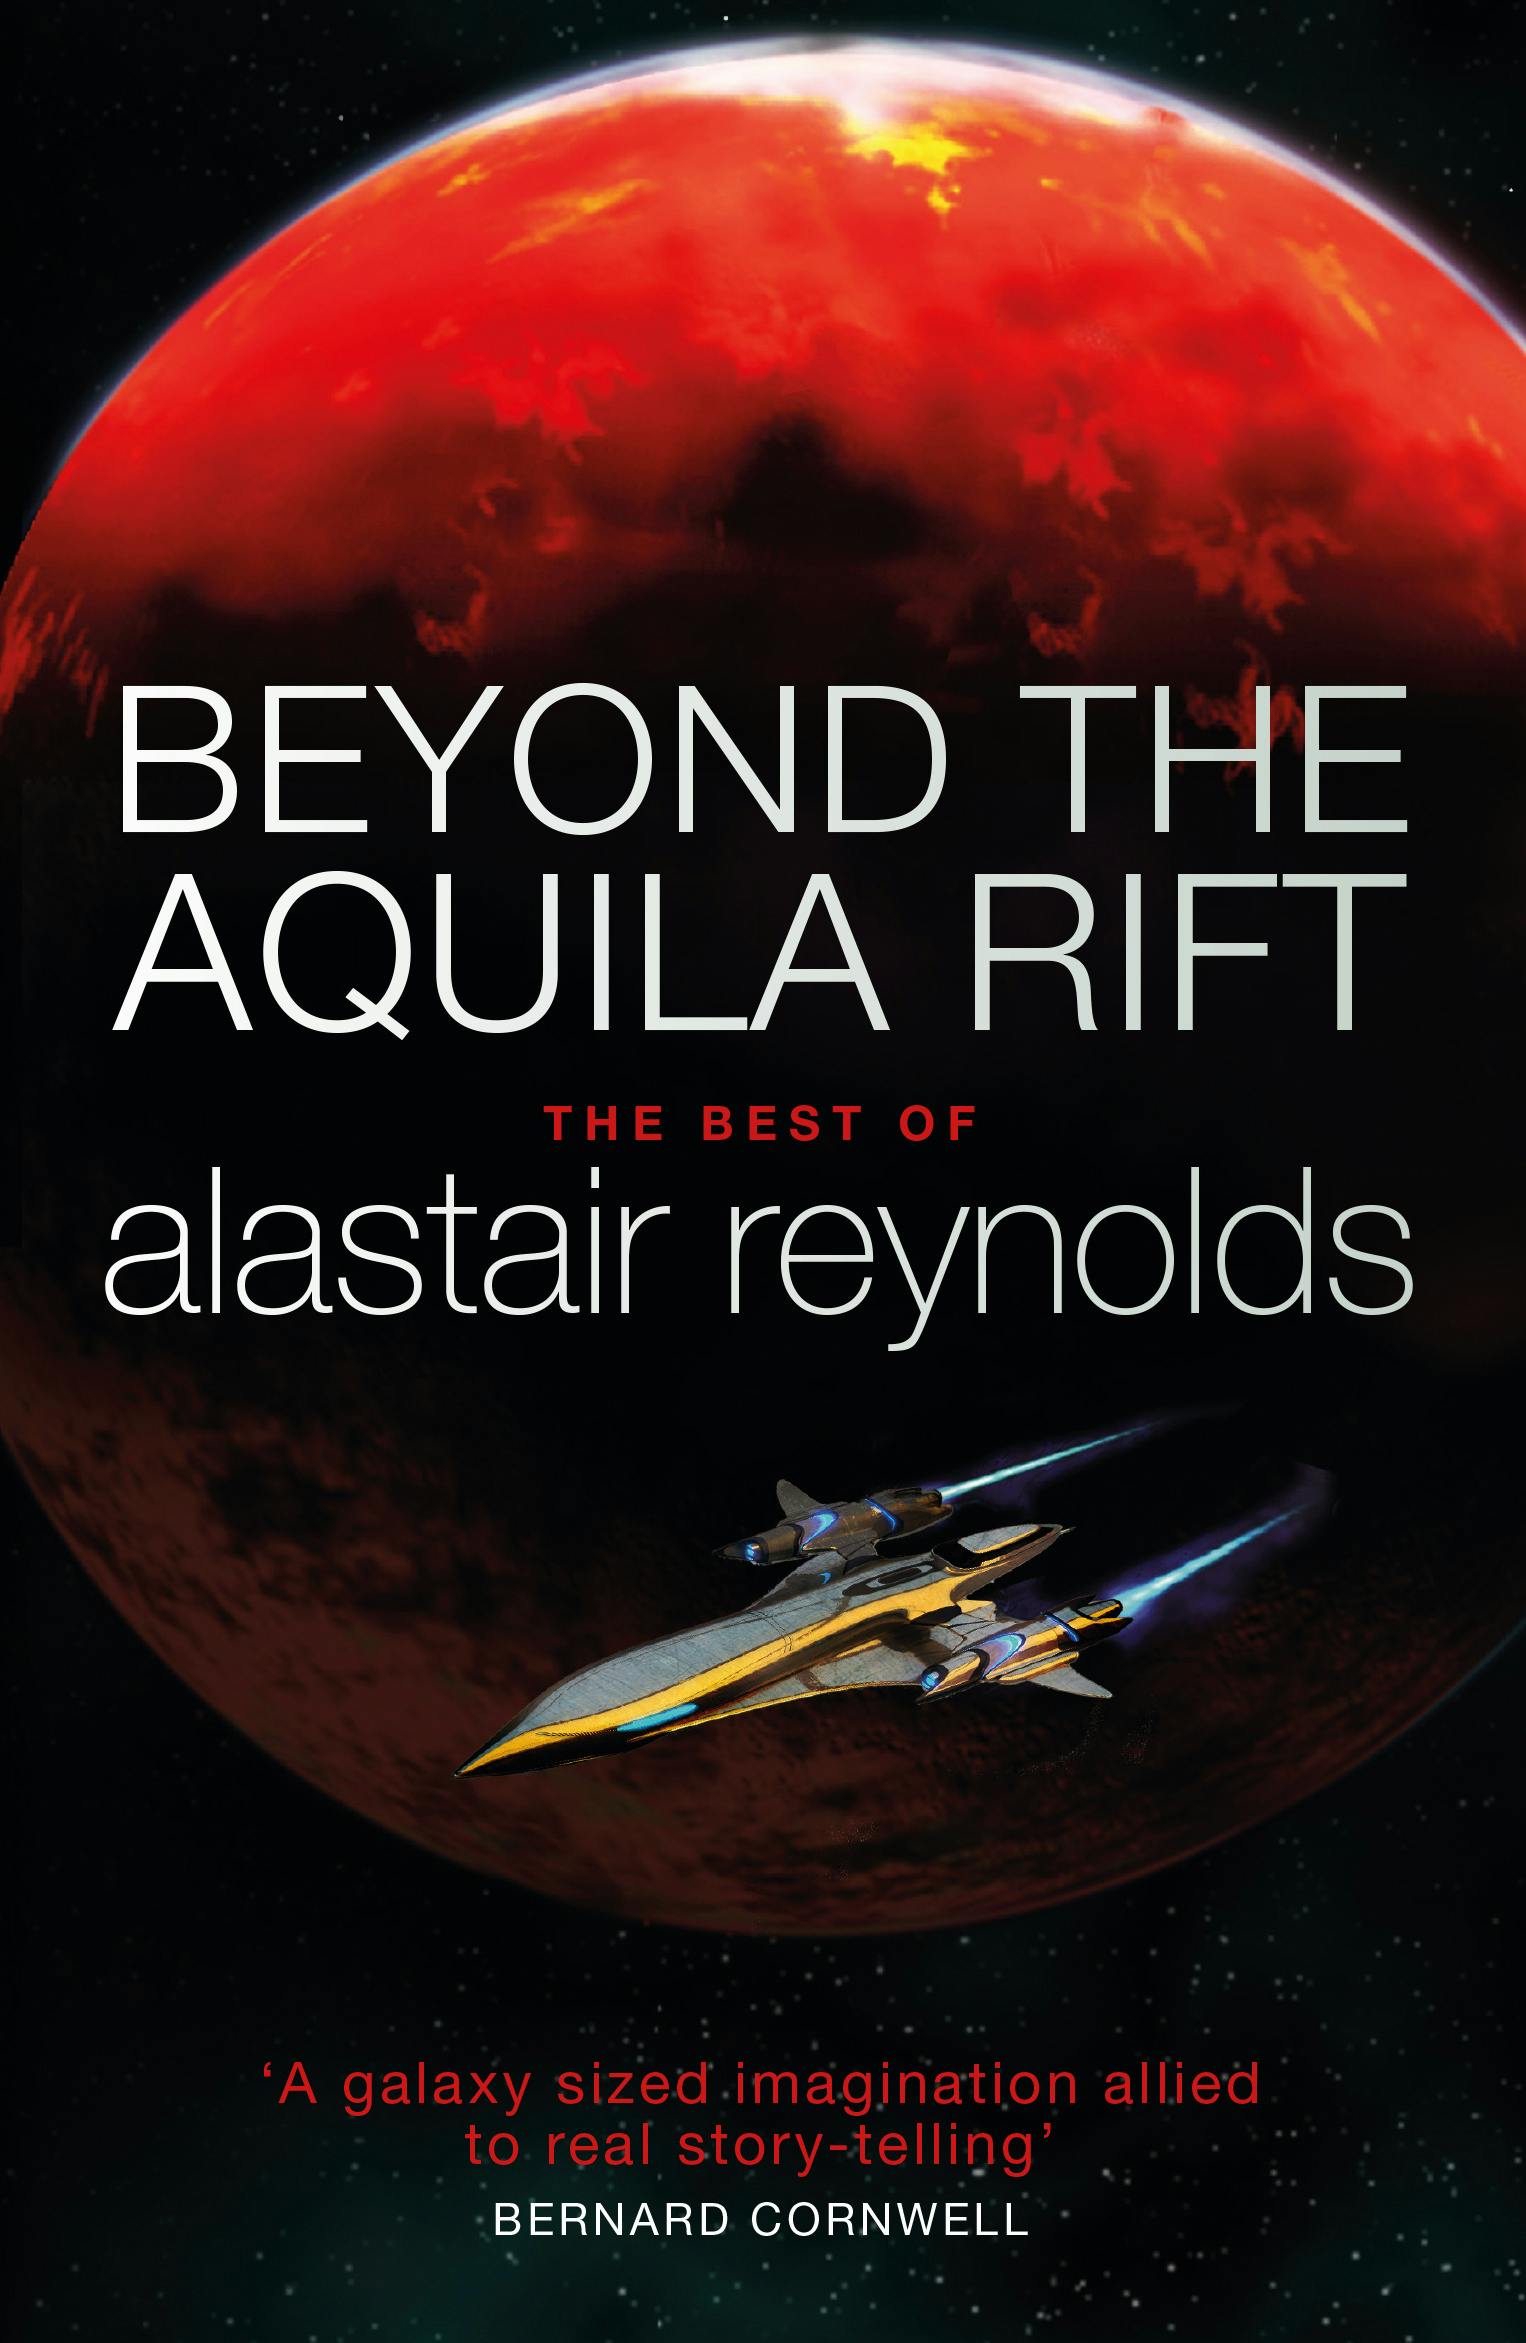 Beyond the Aquila Rift: The Best of Alastair Reynolds by Alastair